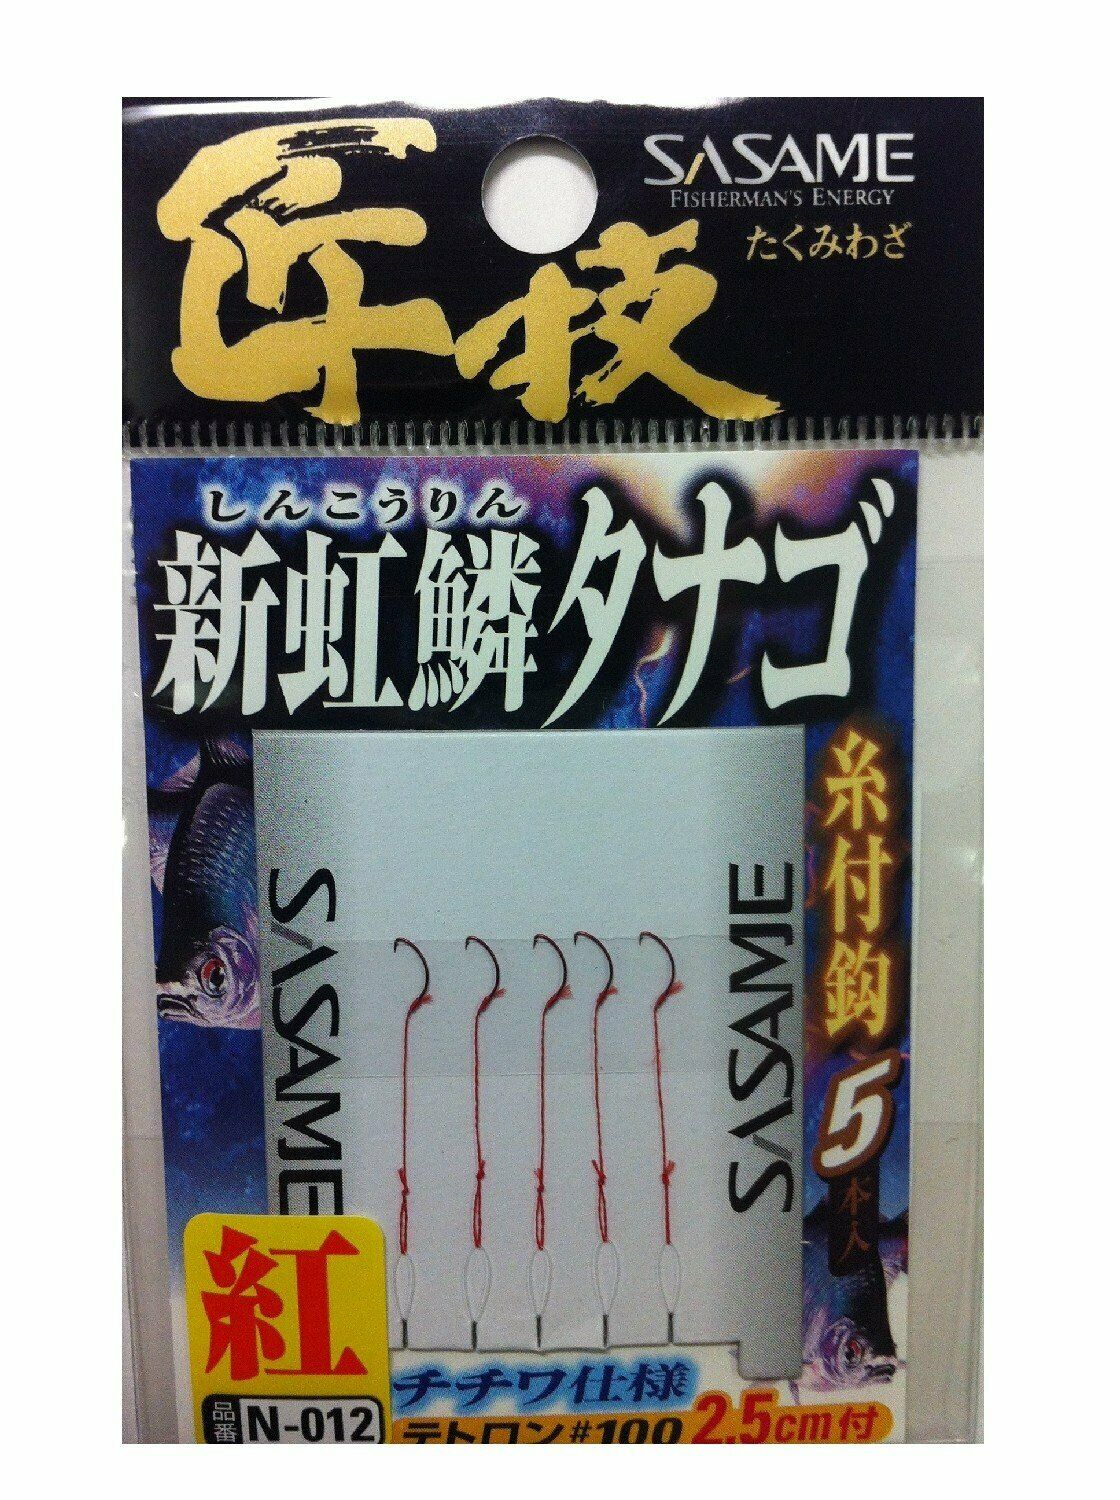 SASAME Red Snelled 2.5 cm Tanago Microfishing Hooks from Japan (5 pack